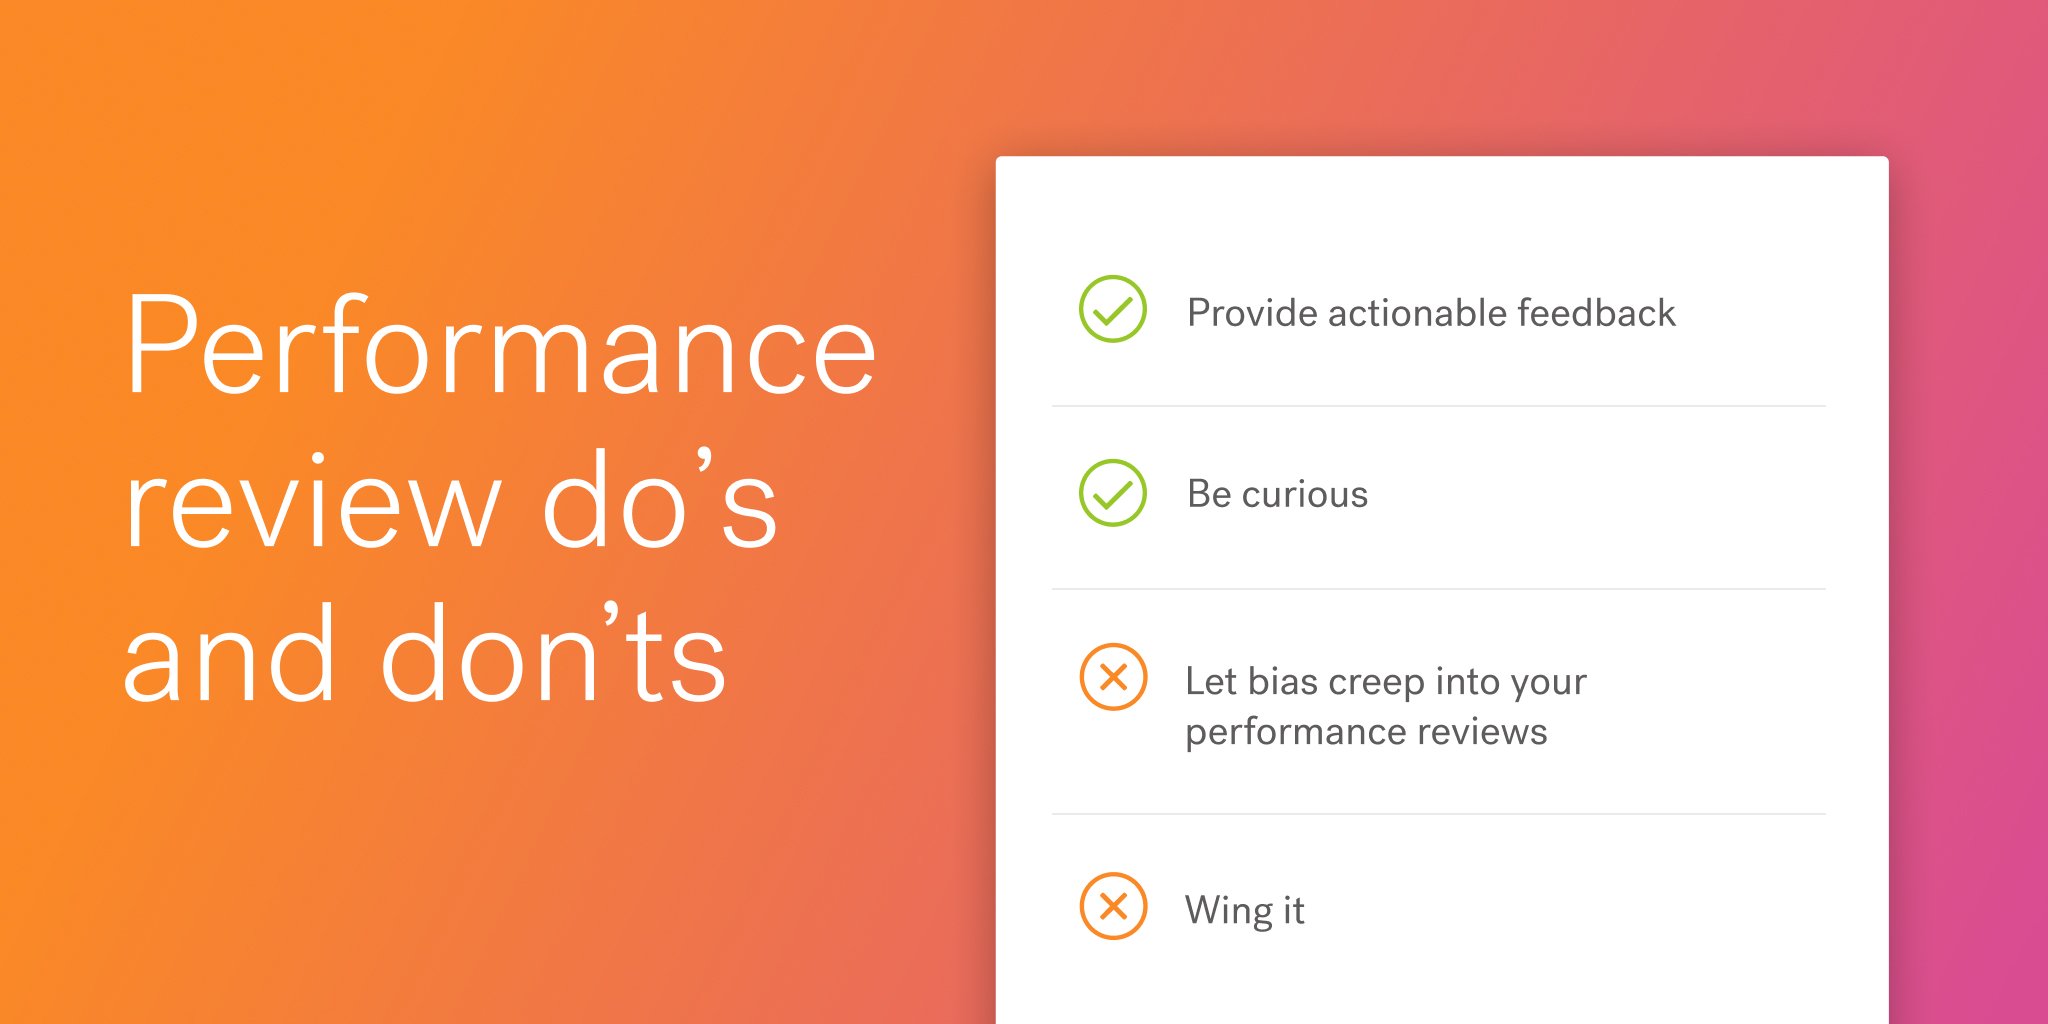 Performance review do's and don'ts 